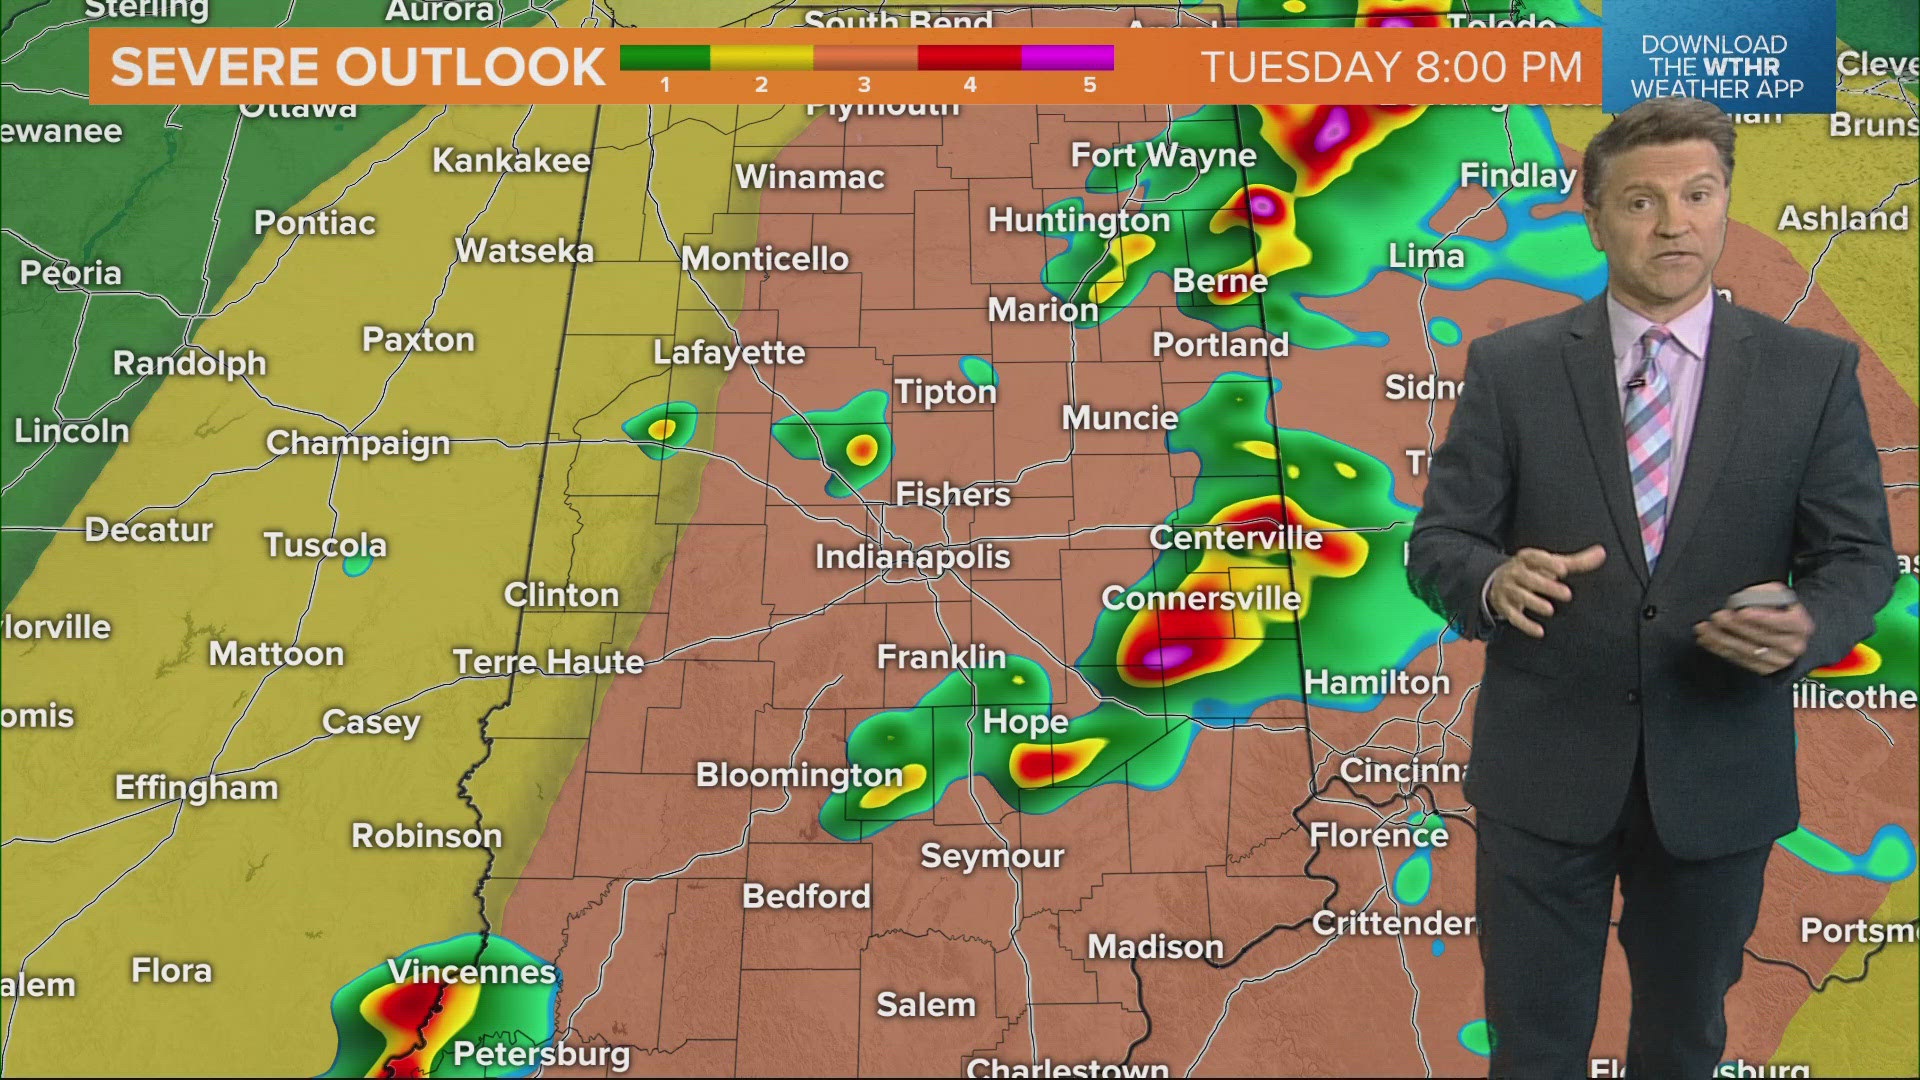 A tornado watch is in effect for parts of central Indiana until 9 p.m. on May 7.